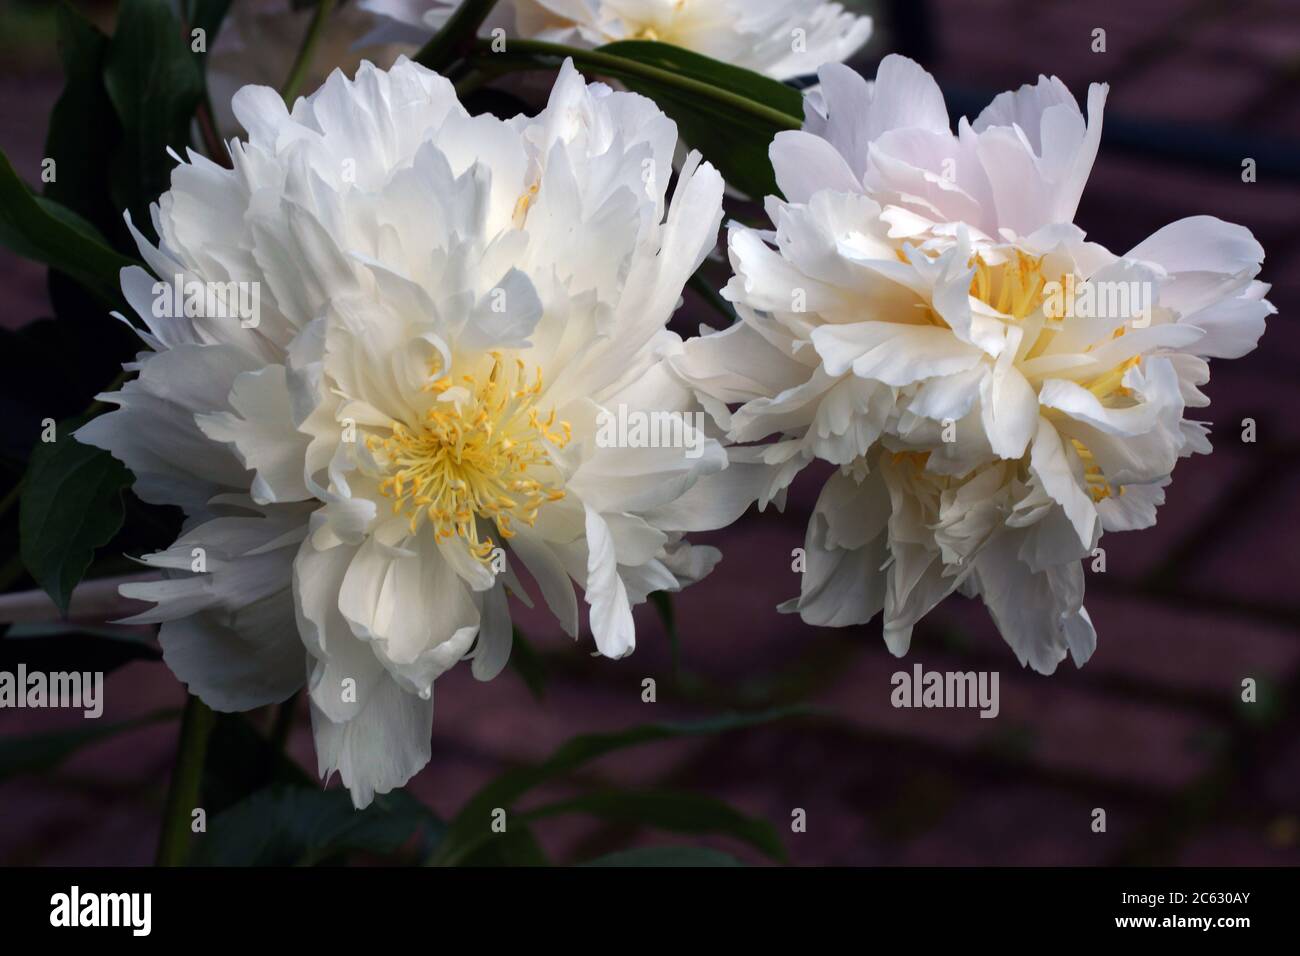 Peony of Chinese selection. Beautiful white double peonies grow in the garden. Two flowers. Stock Photo